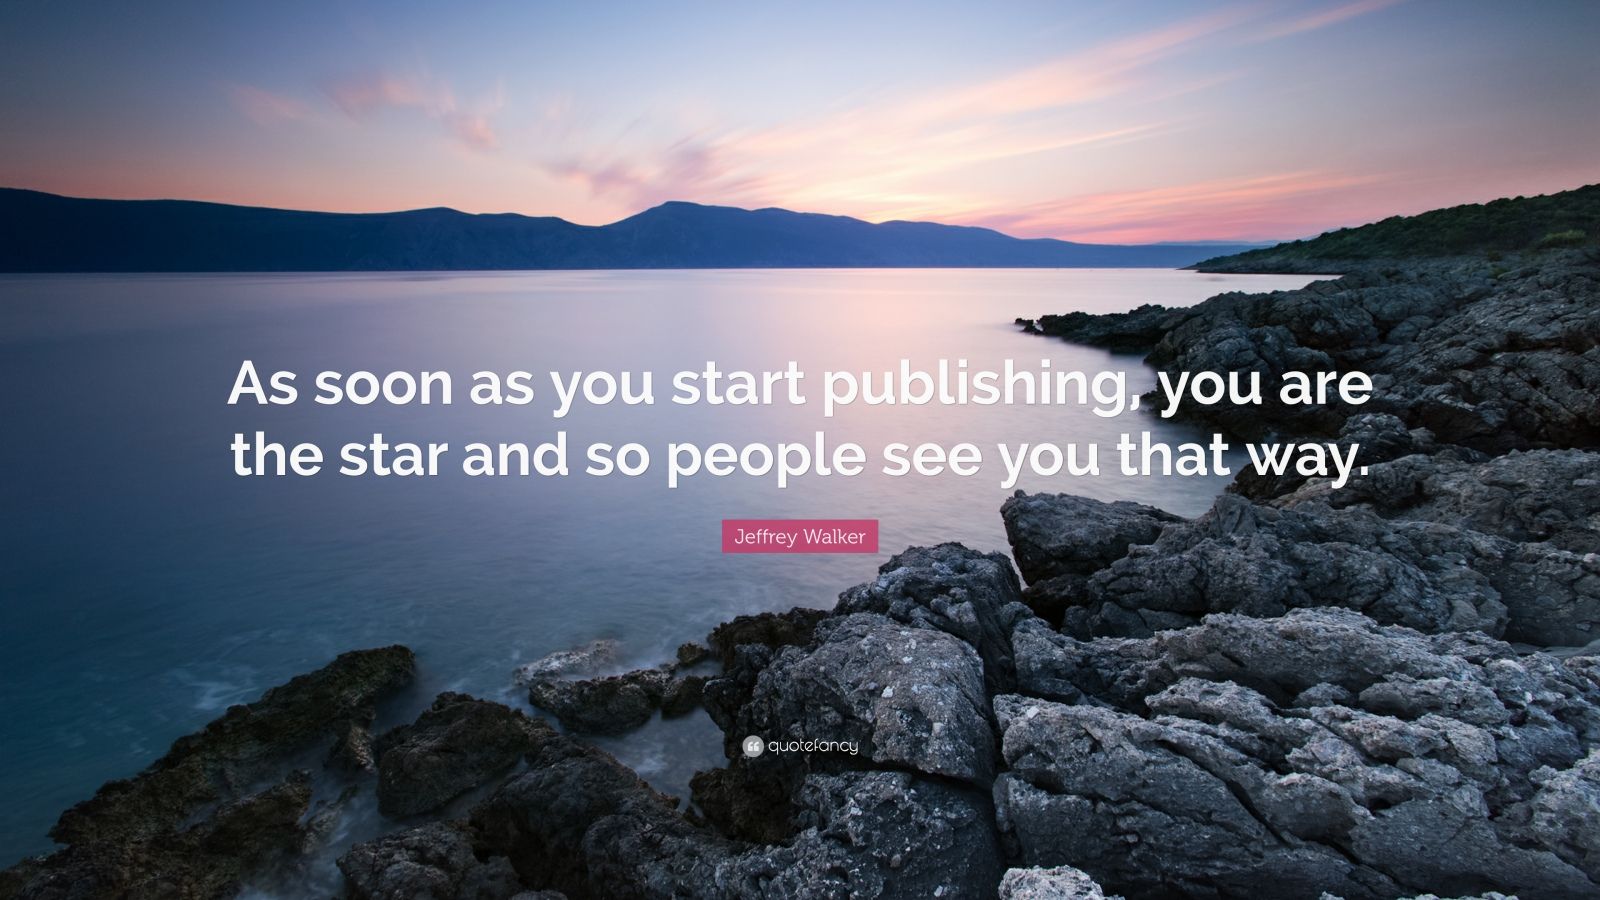 Jeffrey walker quote âas soon as you start publishing you are the star and so people see you that wayâ